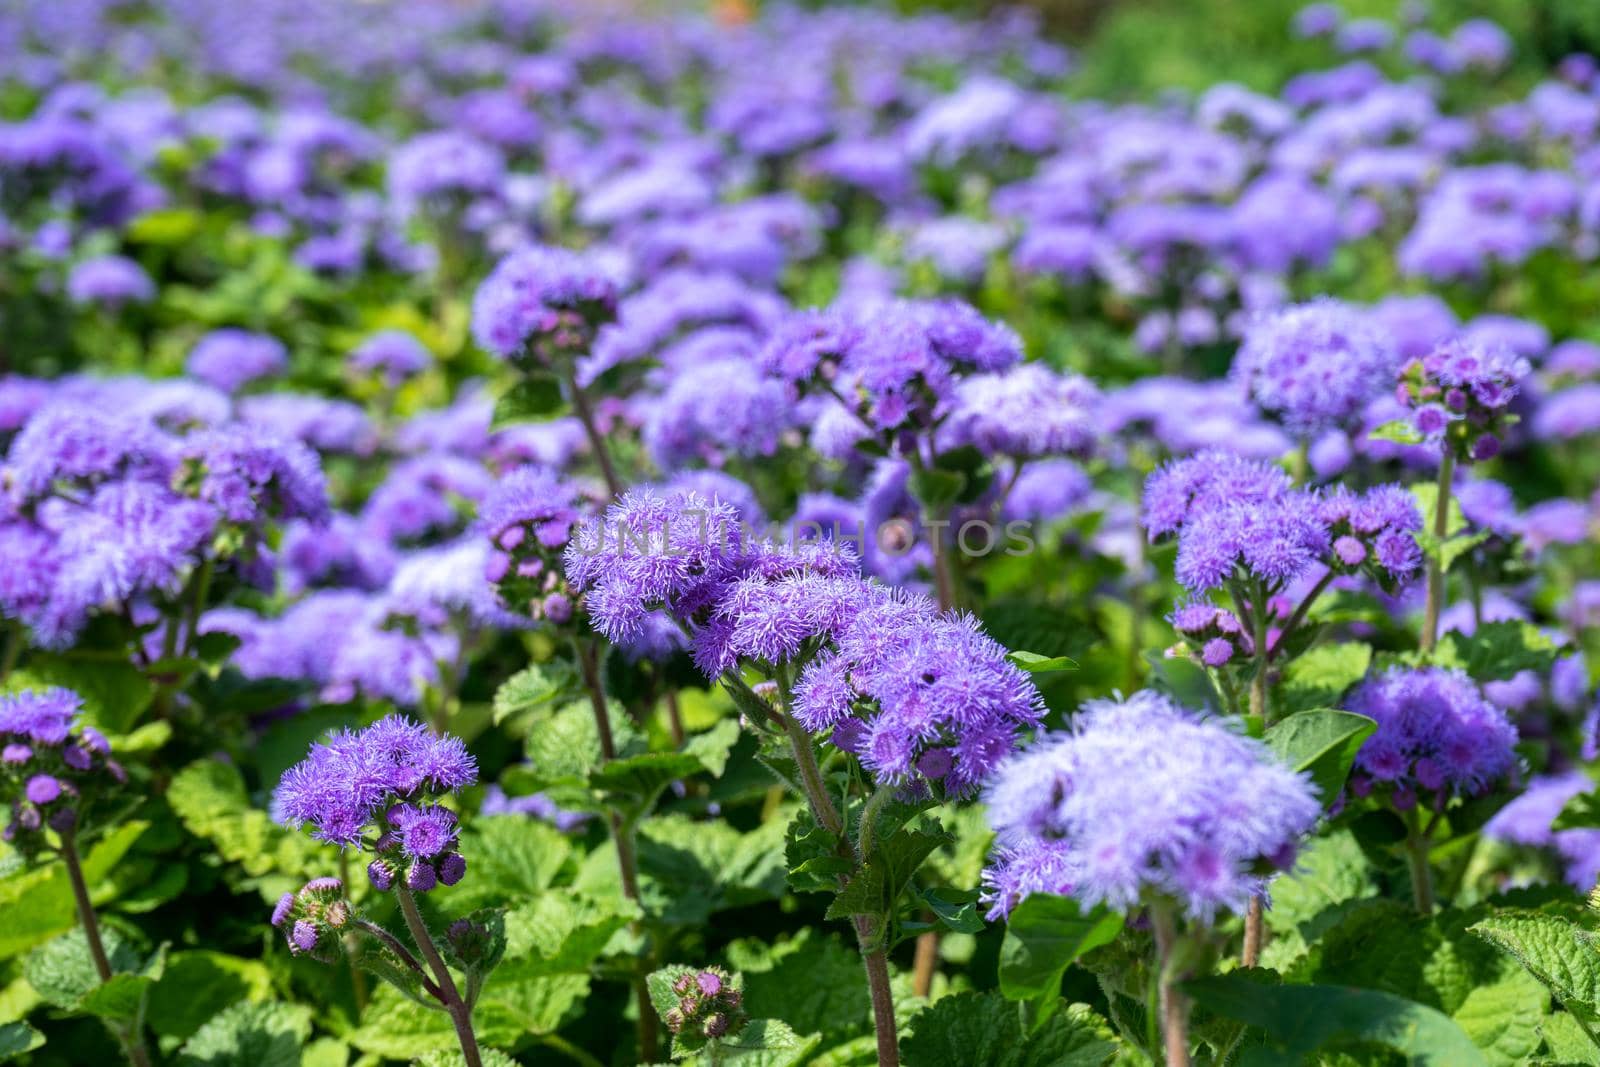 Selective focus of Ageratum billy goat weed flowers. Small purple grass flowers in the garden on blurred background by Serhii_Voroshchuk